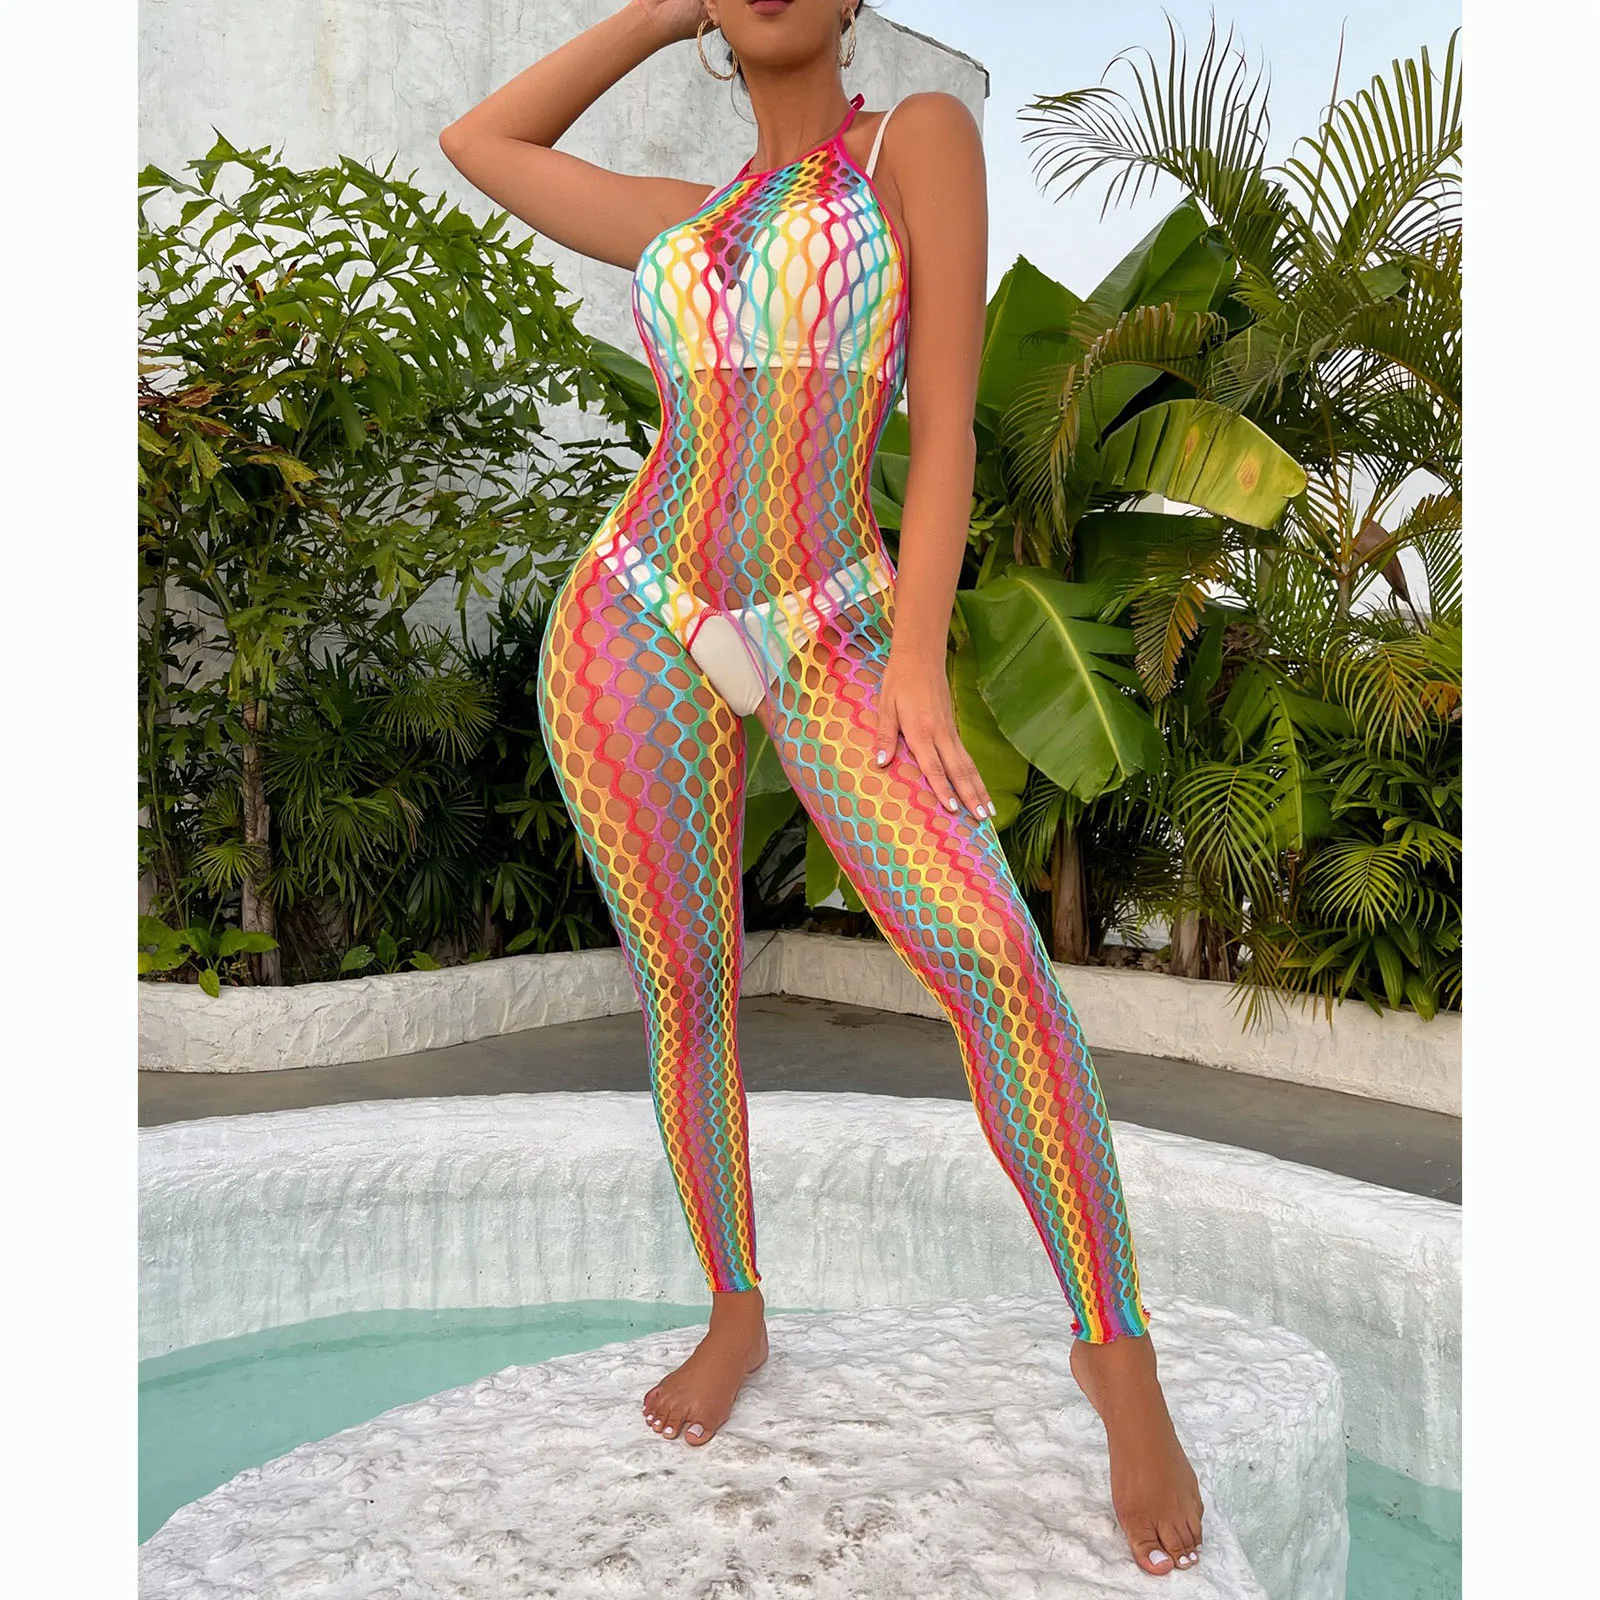 

Womens Colorful Hollow Out See-through Backless Halter with Lace-up Fishnet Nightwear Vacation Beach Bikini Cover Ups Beachwear